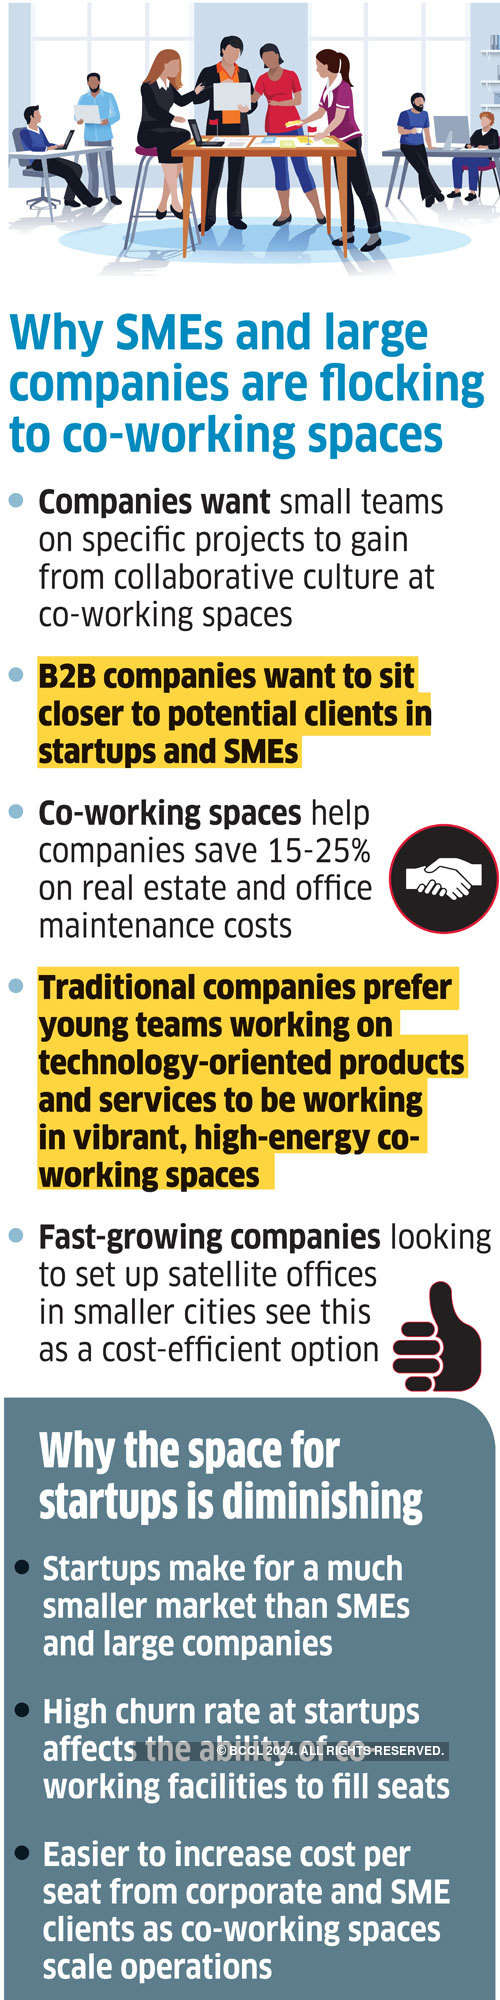 Why the co-working industry is gravitating towards large companies and SMEs